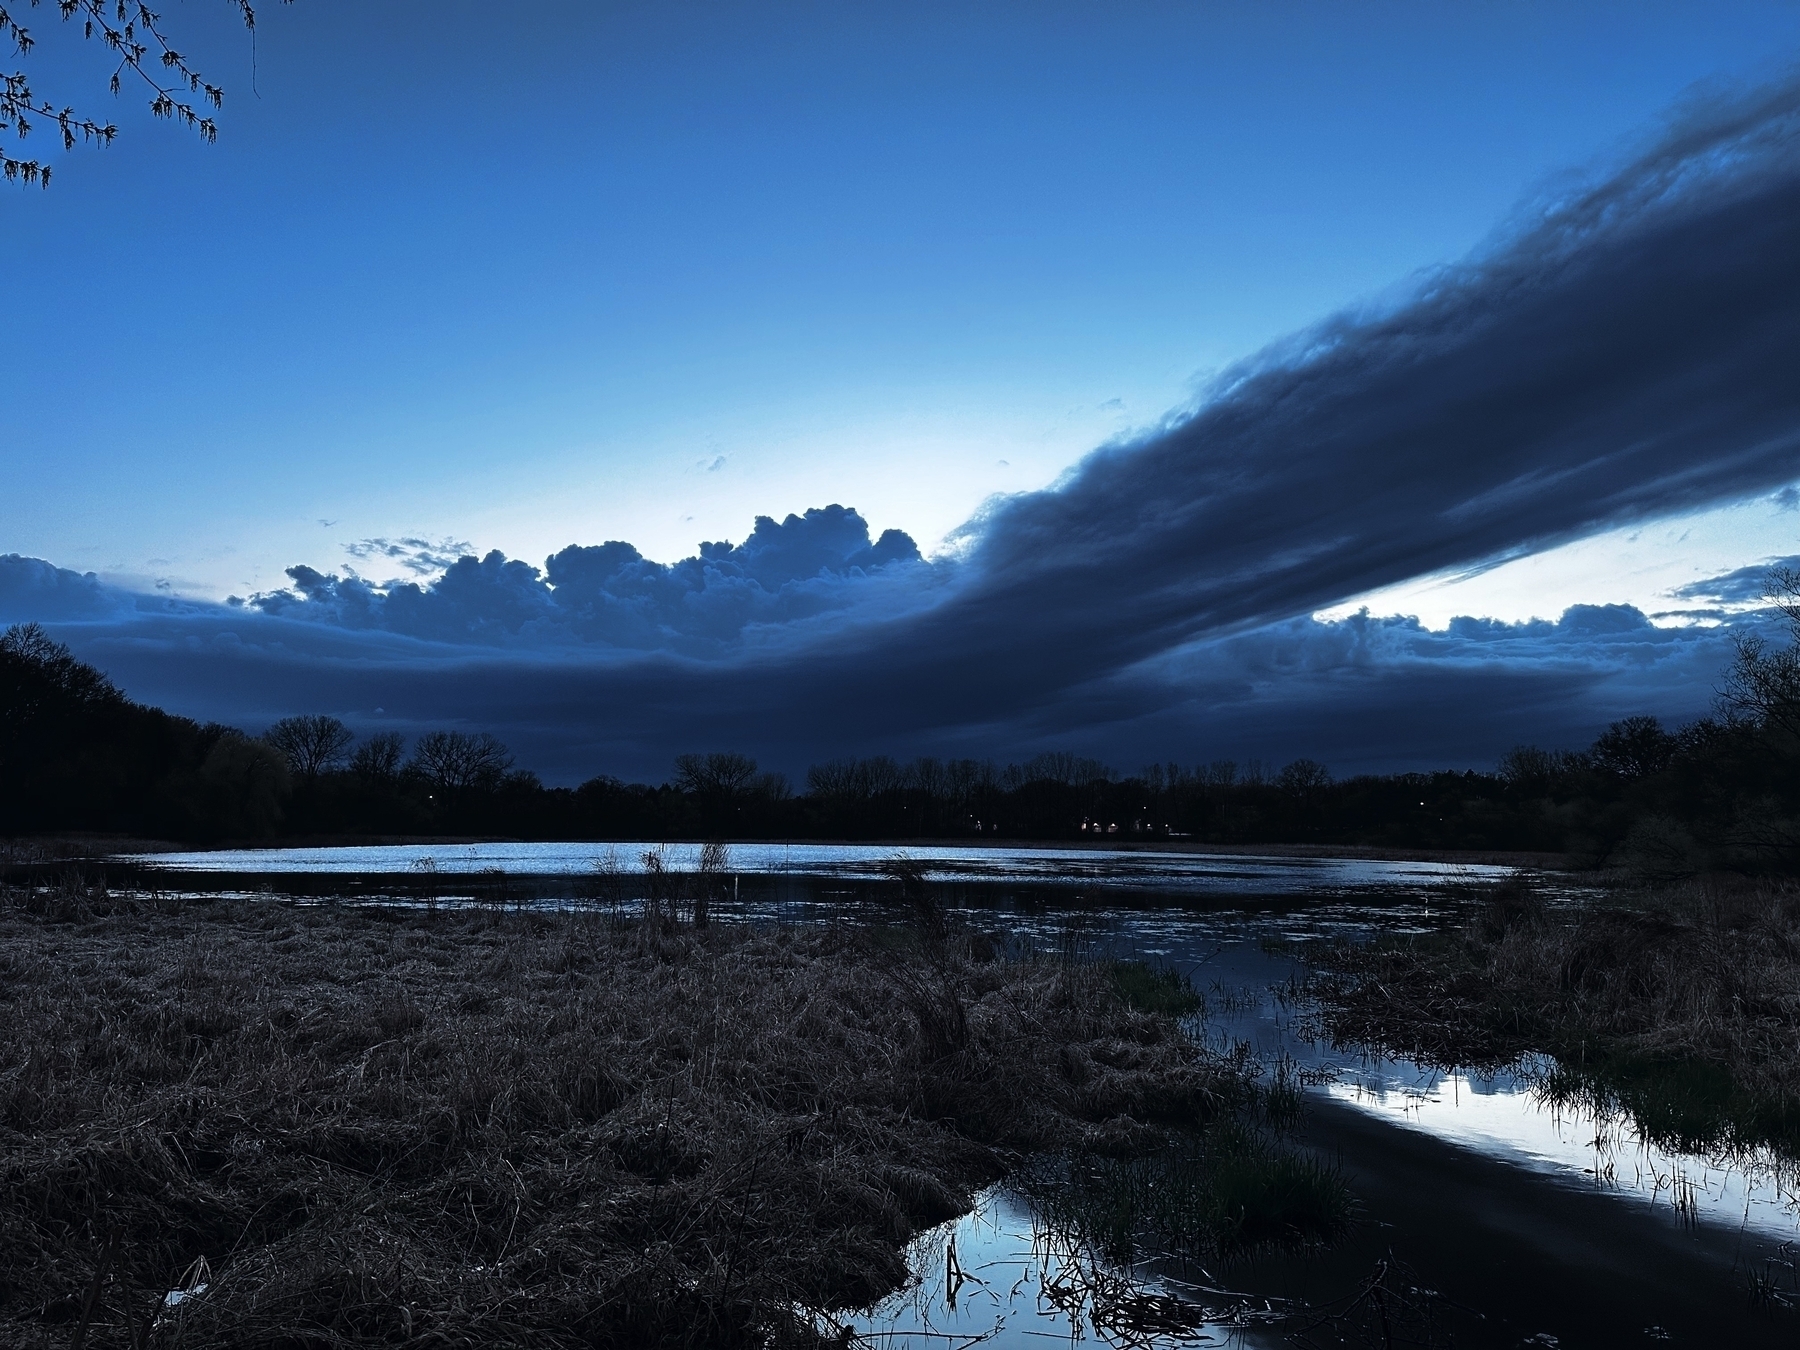 Dark clouds loom over a tranquil water body at dusk, reflecting the waning light, amidst a landscape of contrastingly tranquil fields and trees.